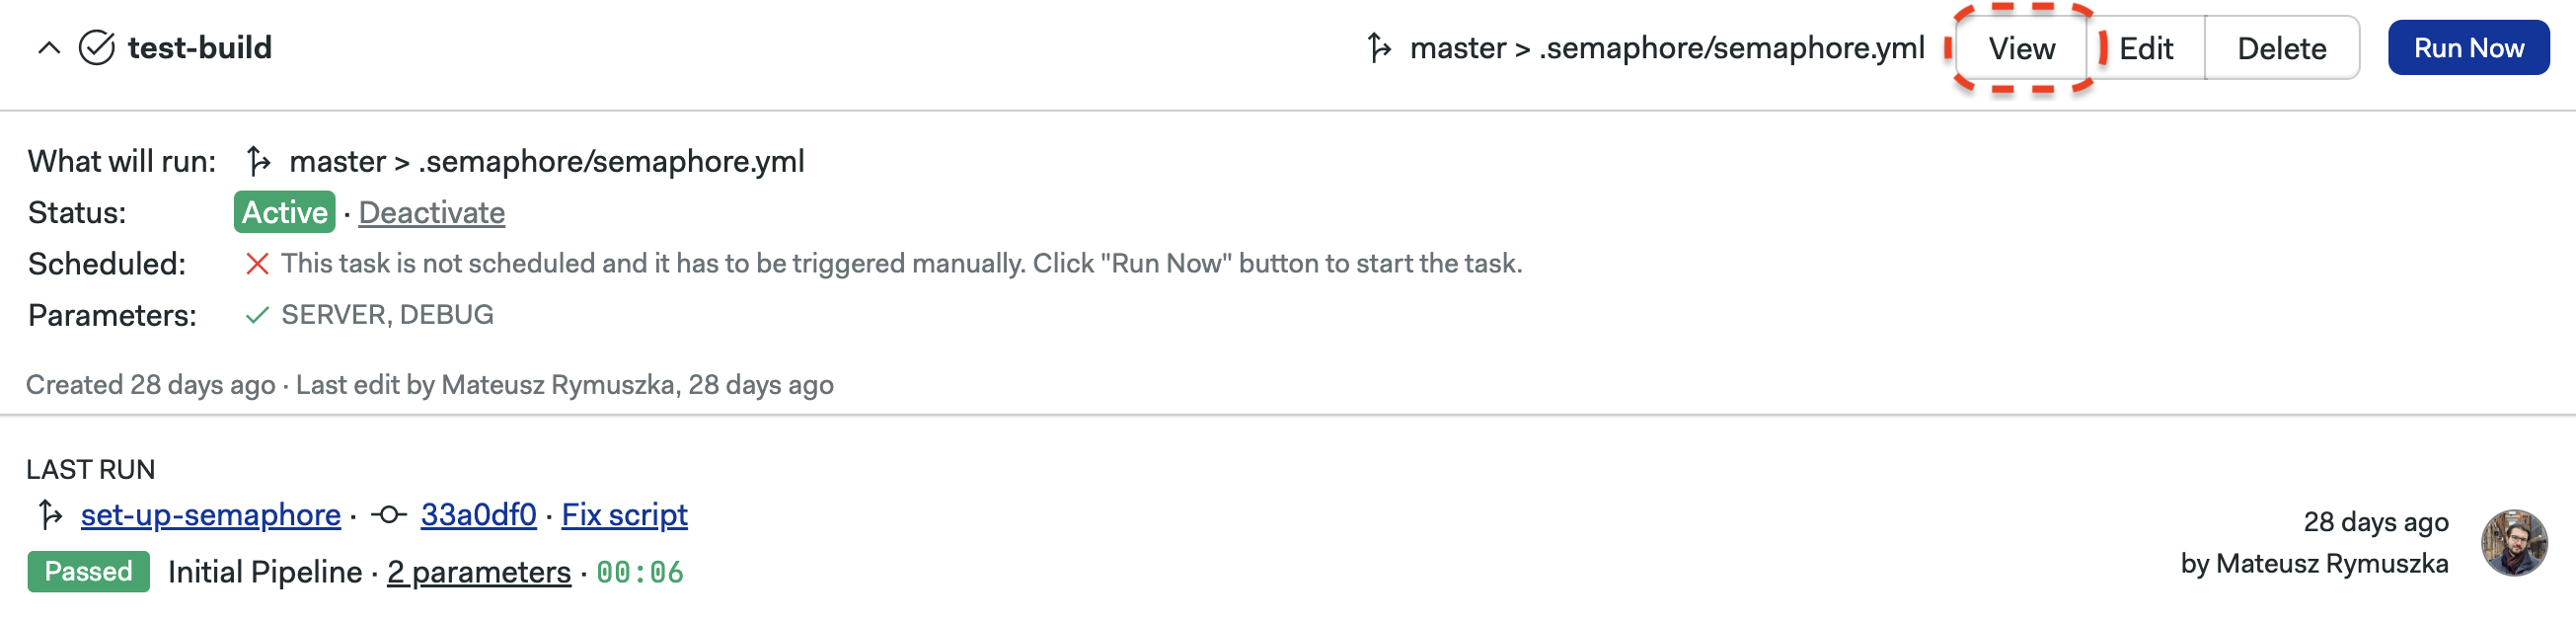 View button in the project tasks page